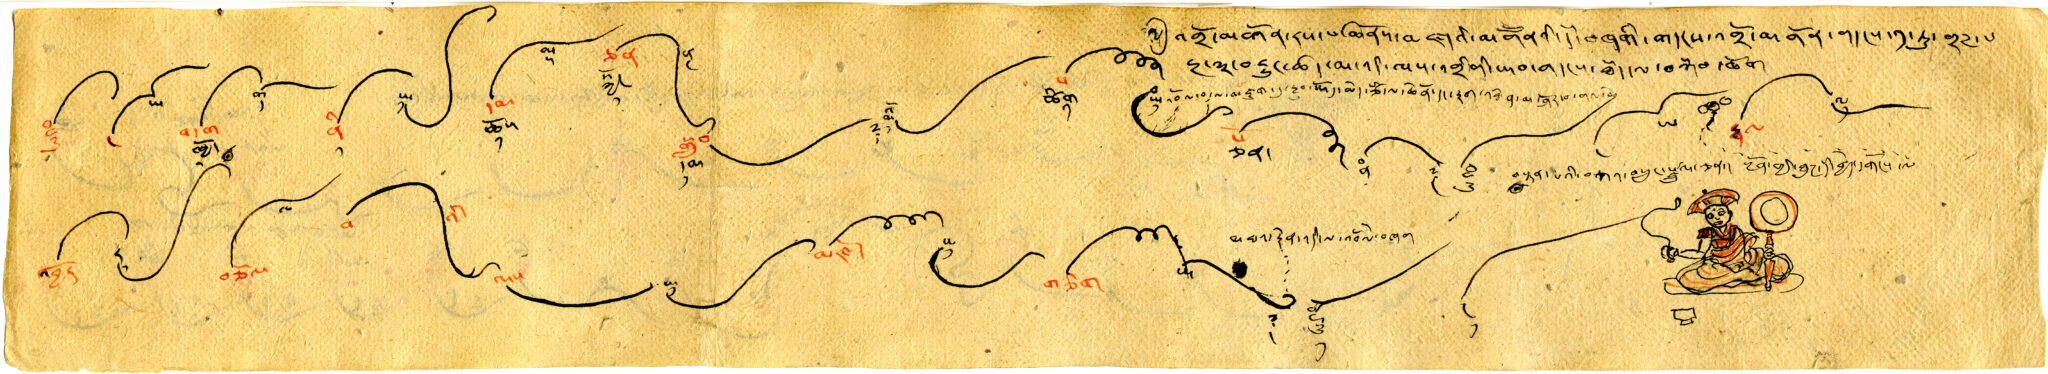 Two lines of arabesques marked with red ink on sepia paper; text and illumination at right